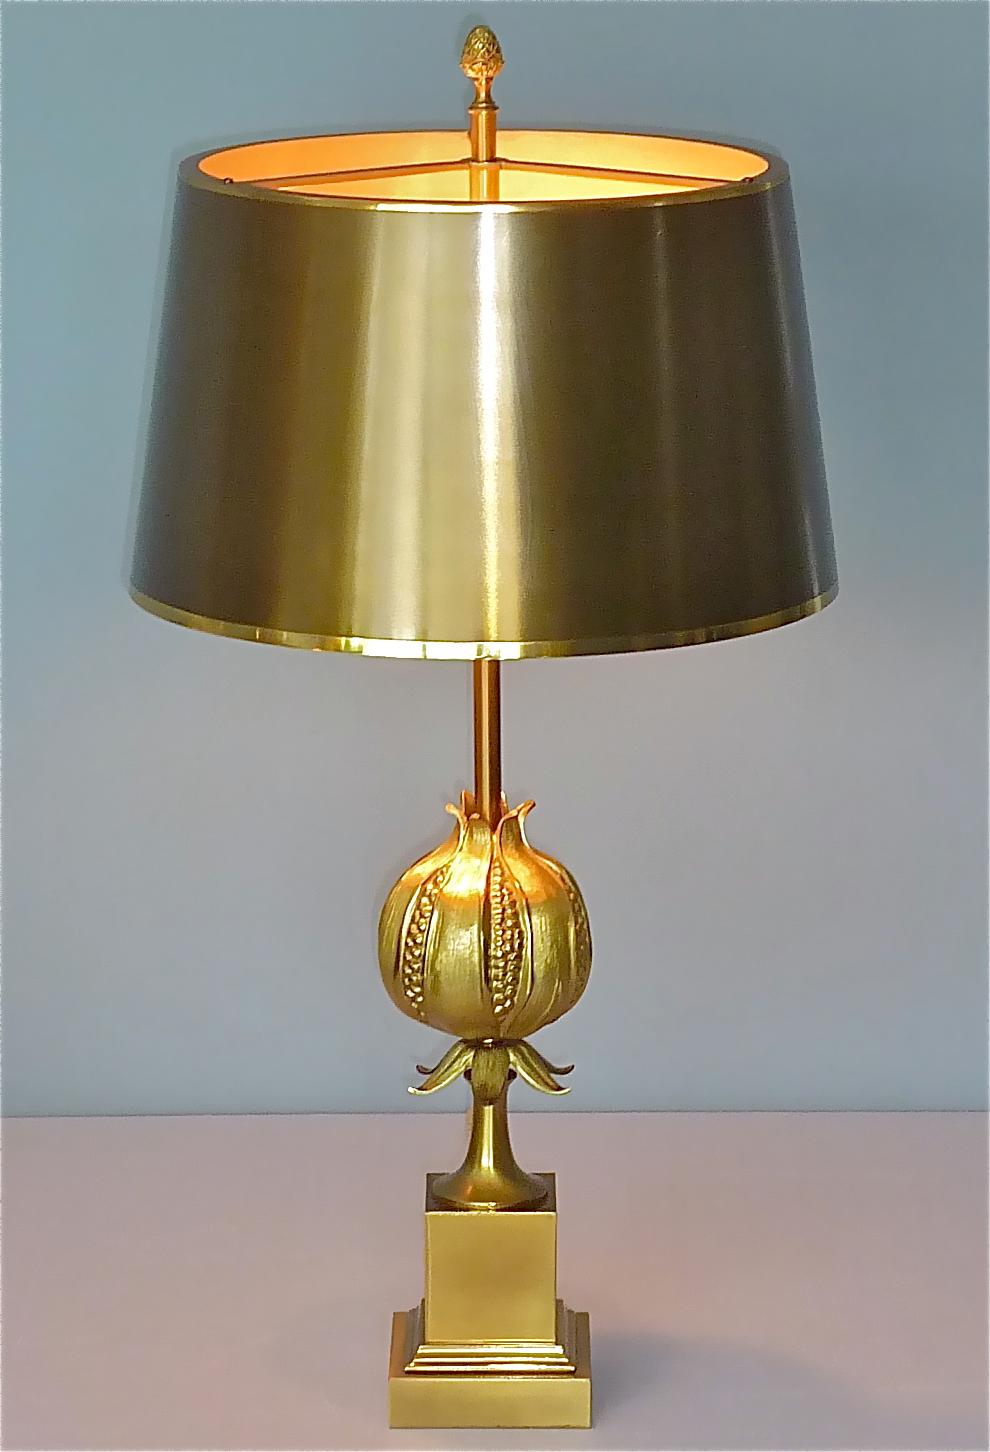 Rare Signed Gilt Bronze French Table Lamp Maison Charles Pomgranate 1970s Jansen For Sale 7